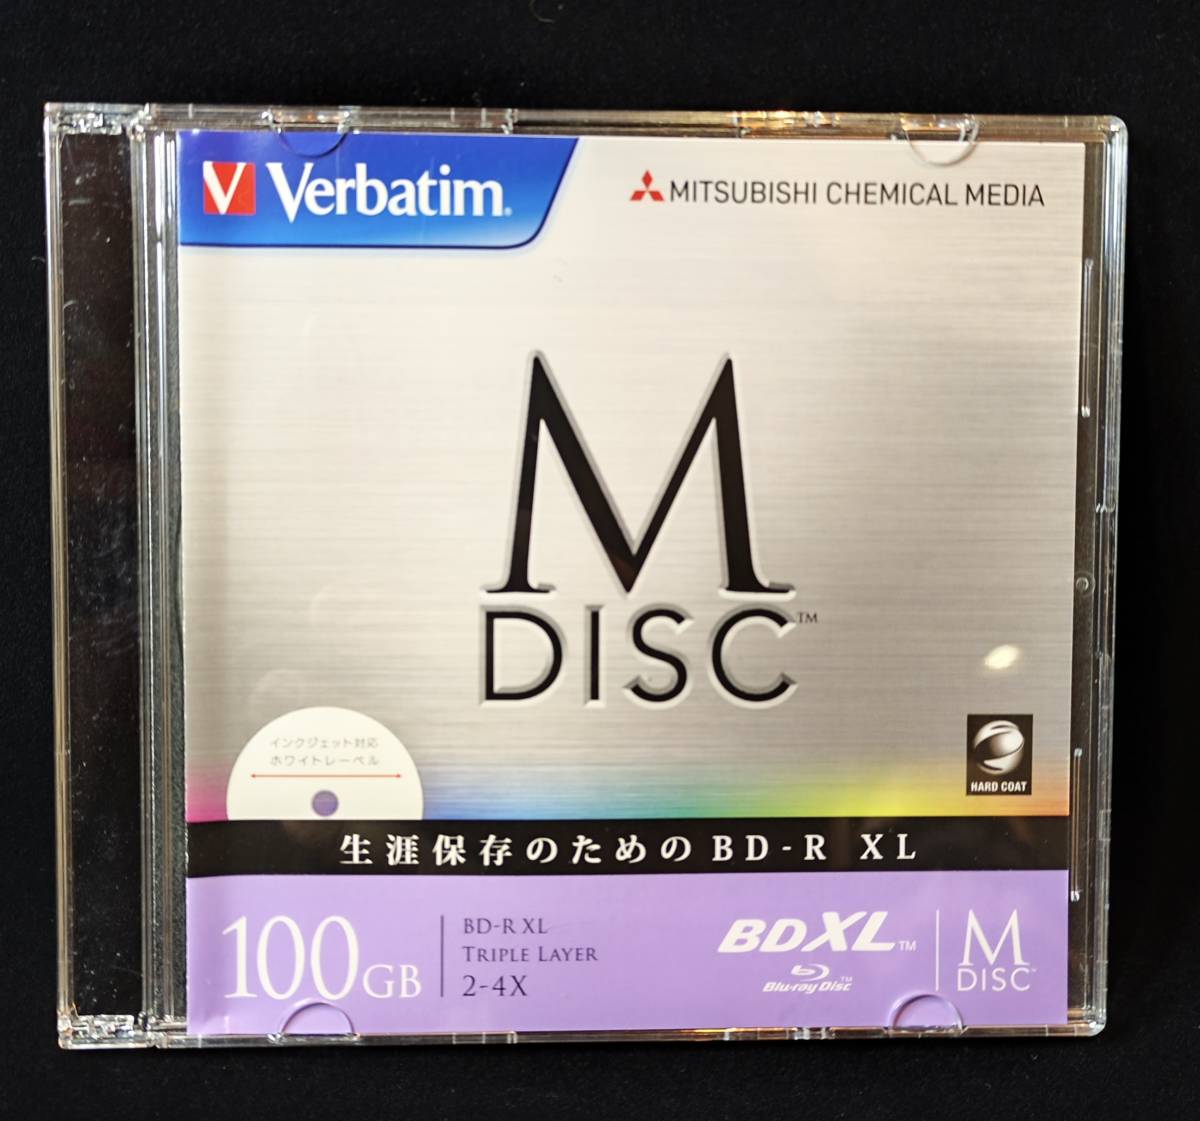  production end goods Verbatim bar Bay tamM-DISC long time period preservation Blue-ray disk 1 times record for BD-R XL 100GB 1 sheets 